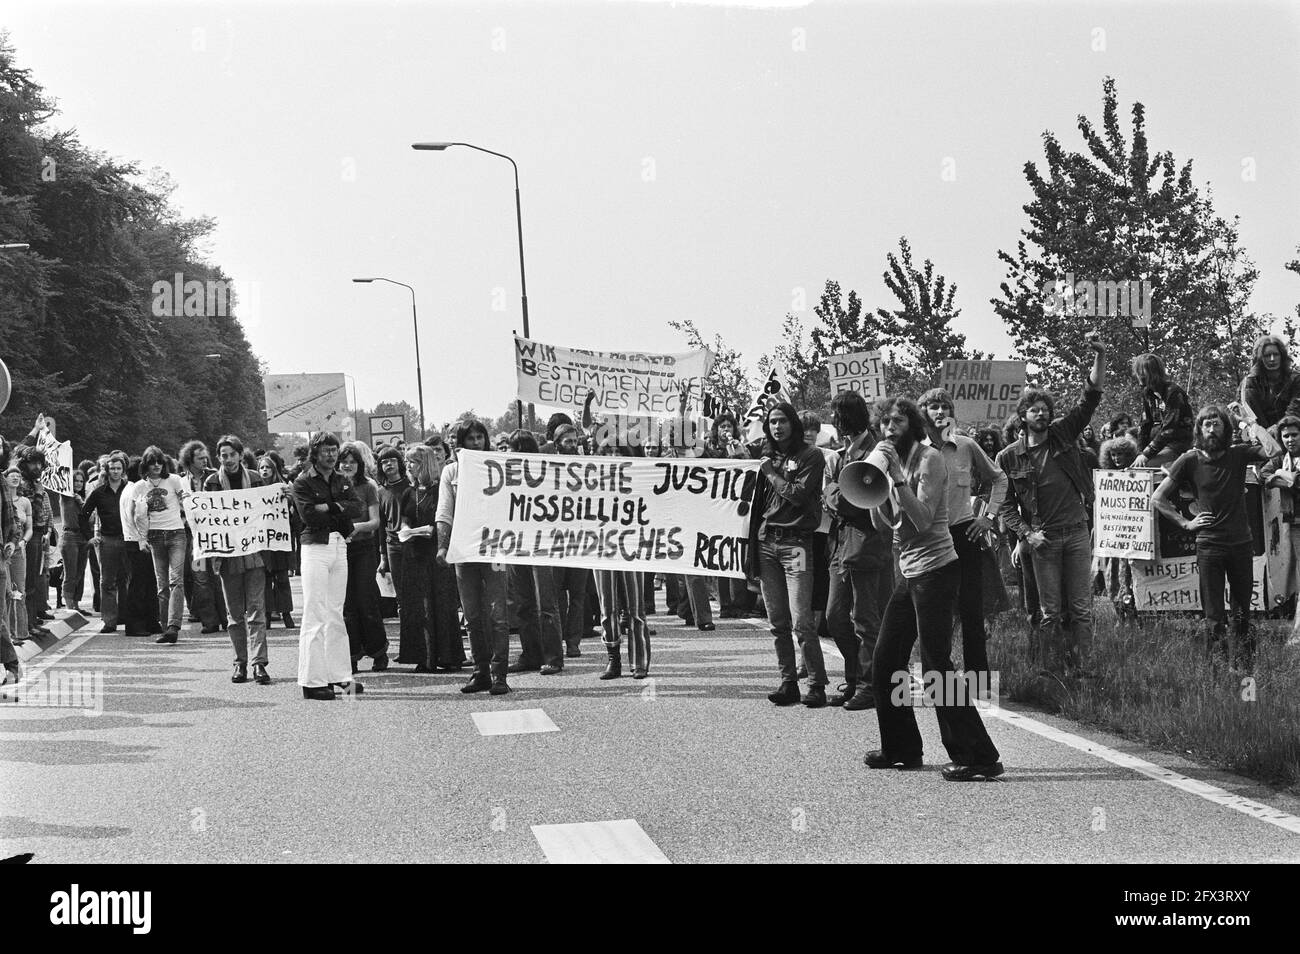 Demonstration for release of Harm Dost convicted in West Germany at Beek  border crossing, demonstrators near German border, May 22, 1976,  demonstrators, demonstrations, border crossings, The Netherlands, 20th  century press agency photo,